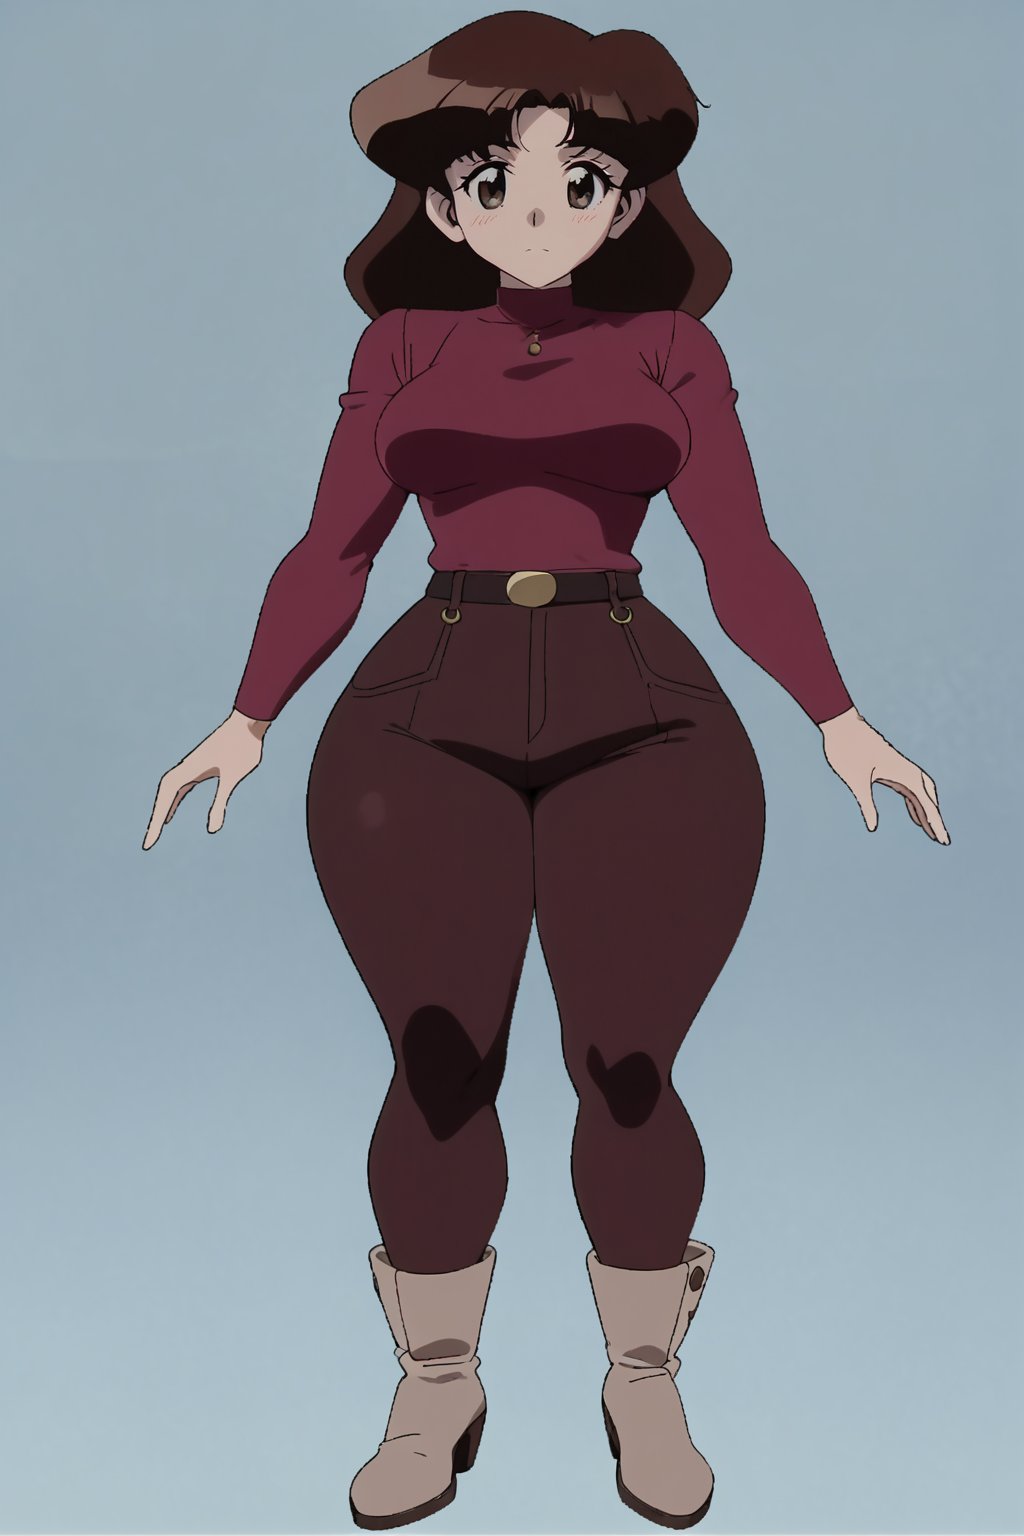 38 year old Milf Female, red long sleeves turtleneck shirt,tight brown trousers, grey boots, short neck curvy bang brown hair, brown eyes, curvy wide hips, Thicc Juicy Big Butt, 40 inches butt, character_sheet, looking-at-viewer, masterpiece, best quality, detailed face, HD detailed, high_resolution, Shinji_Nishikawa_Artstyle, Shoujo_Anime,90s Aesthetic, retro artstyle, reference sheet, 1980s \(style\),